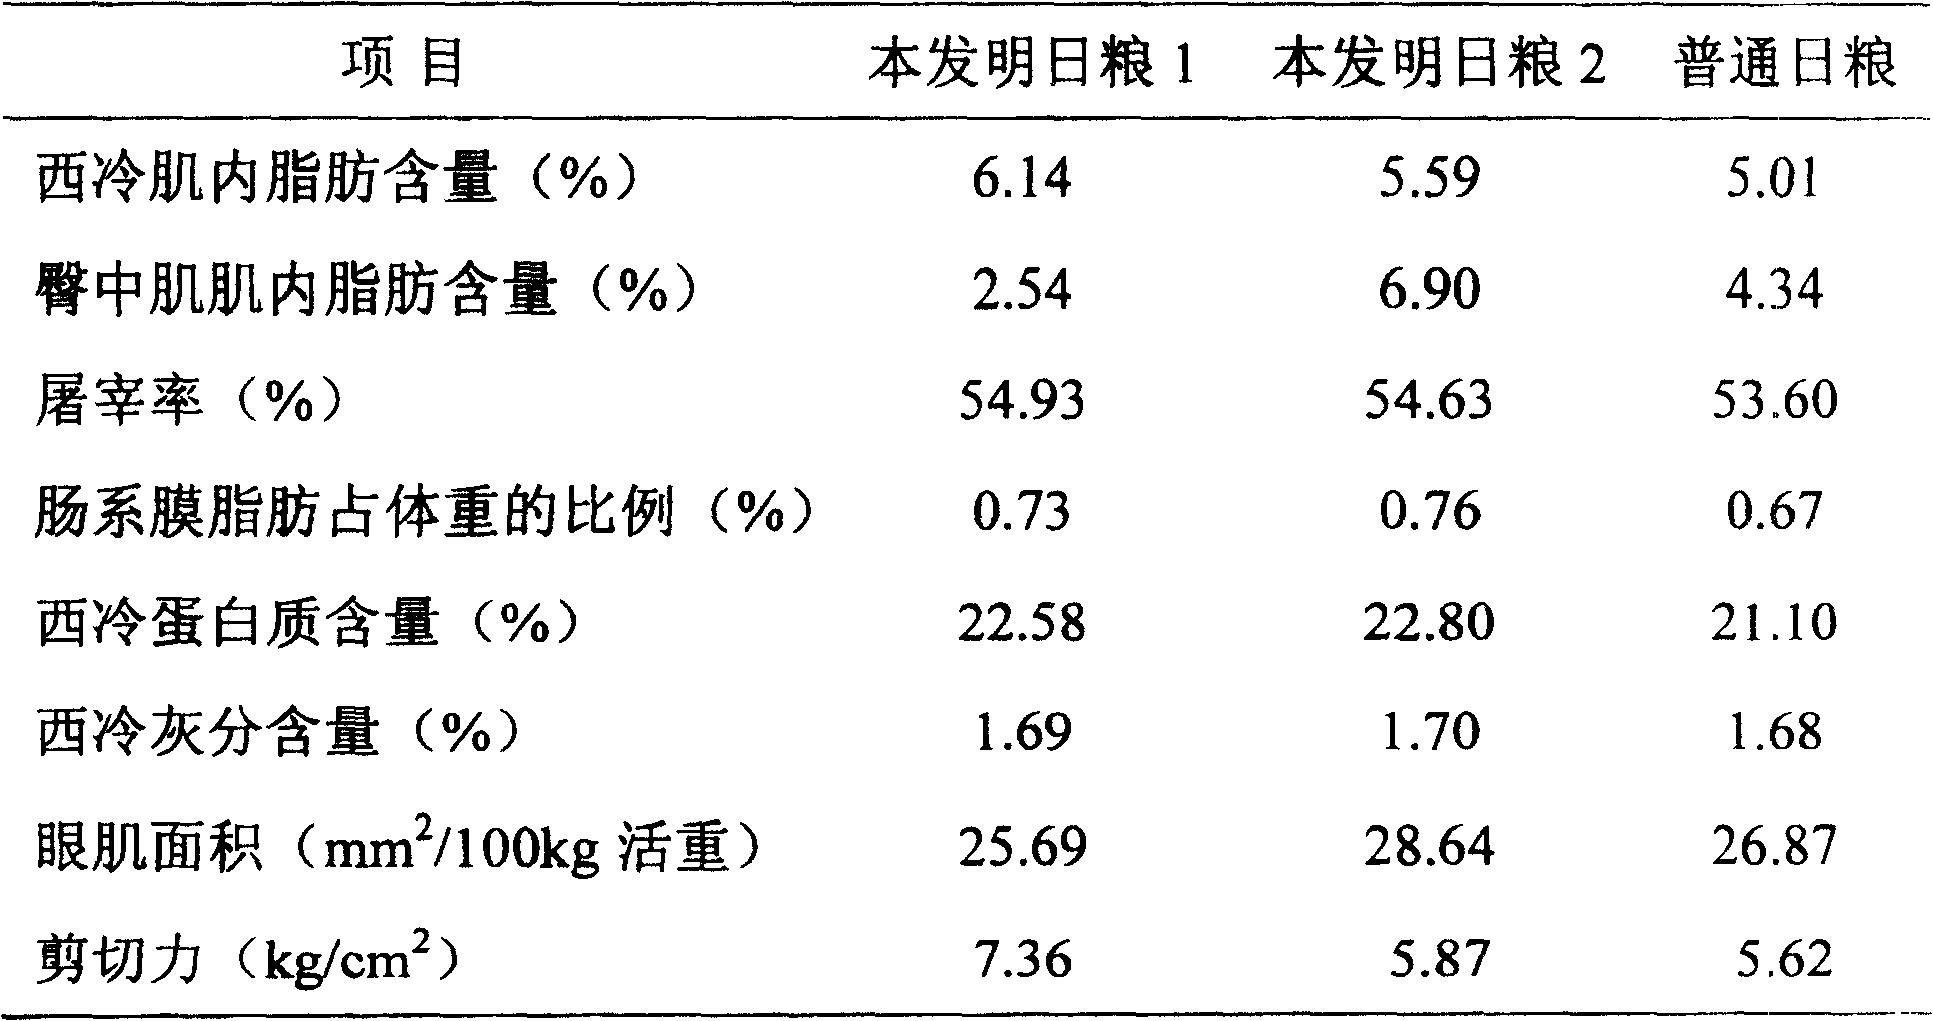 Method for increasing marbling quality grade of beef